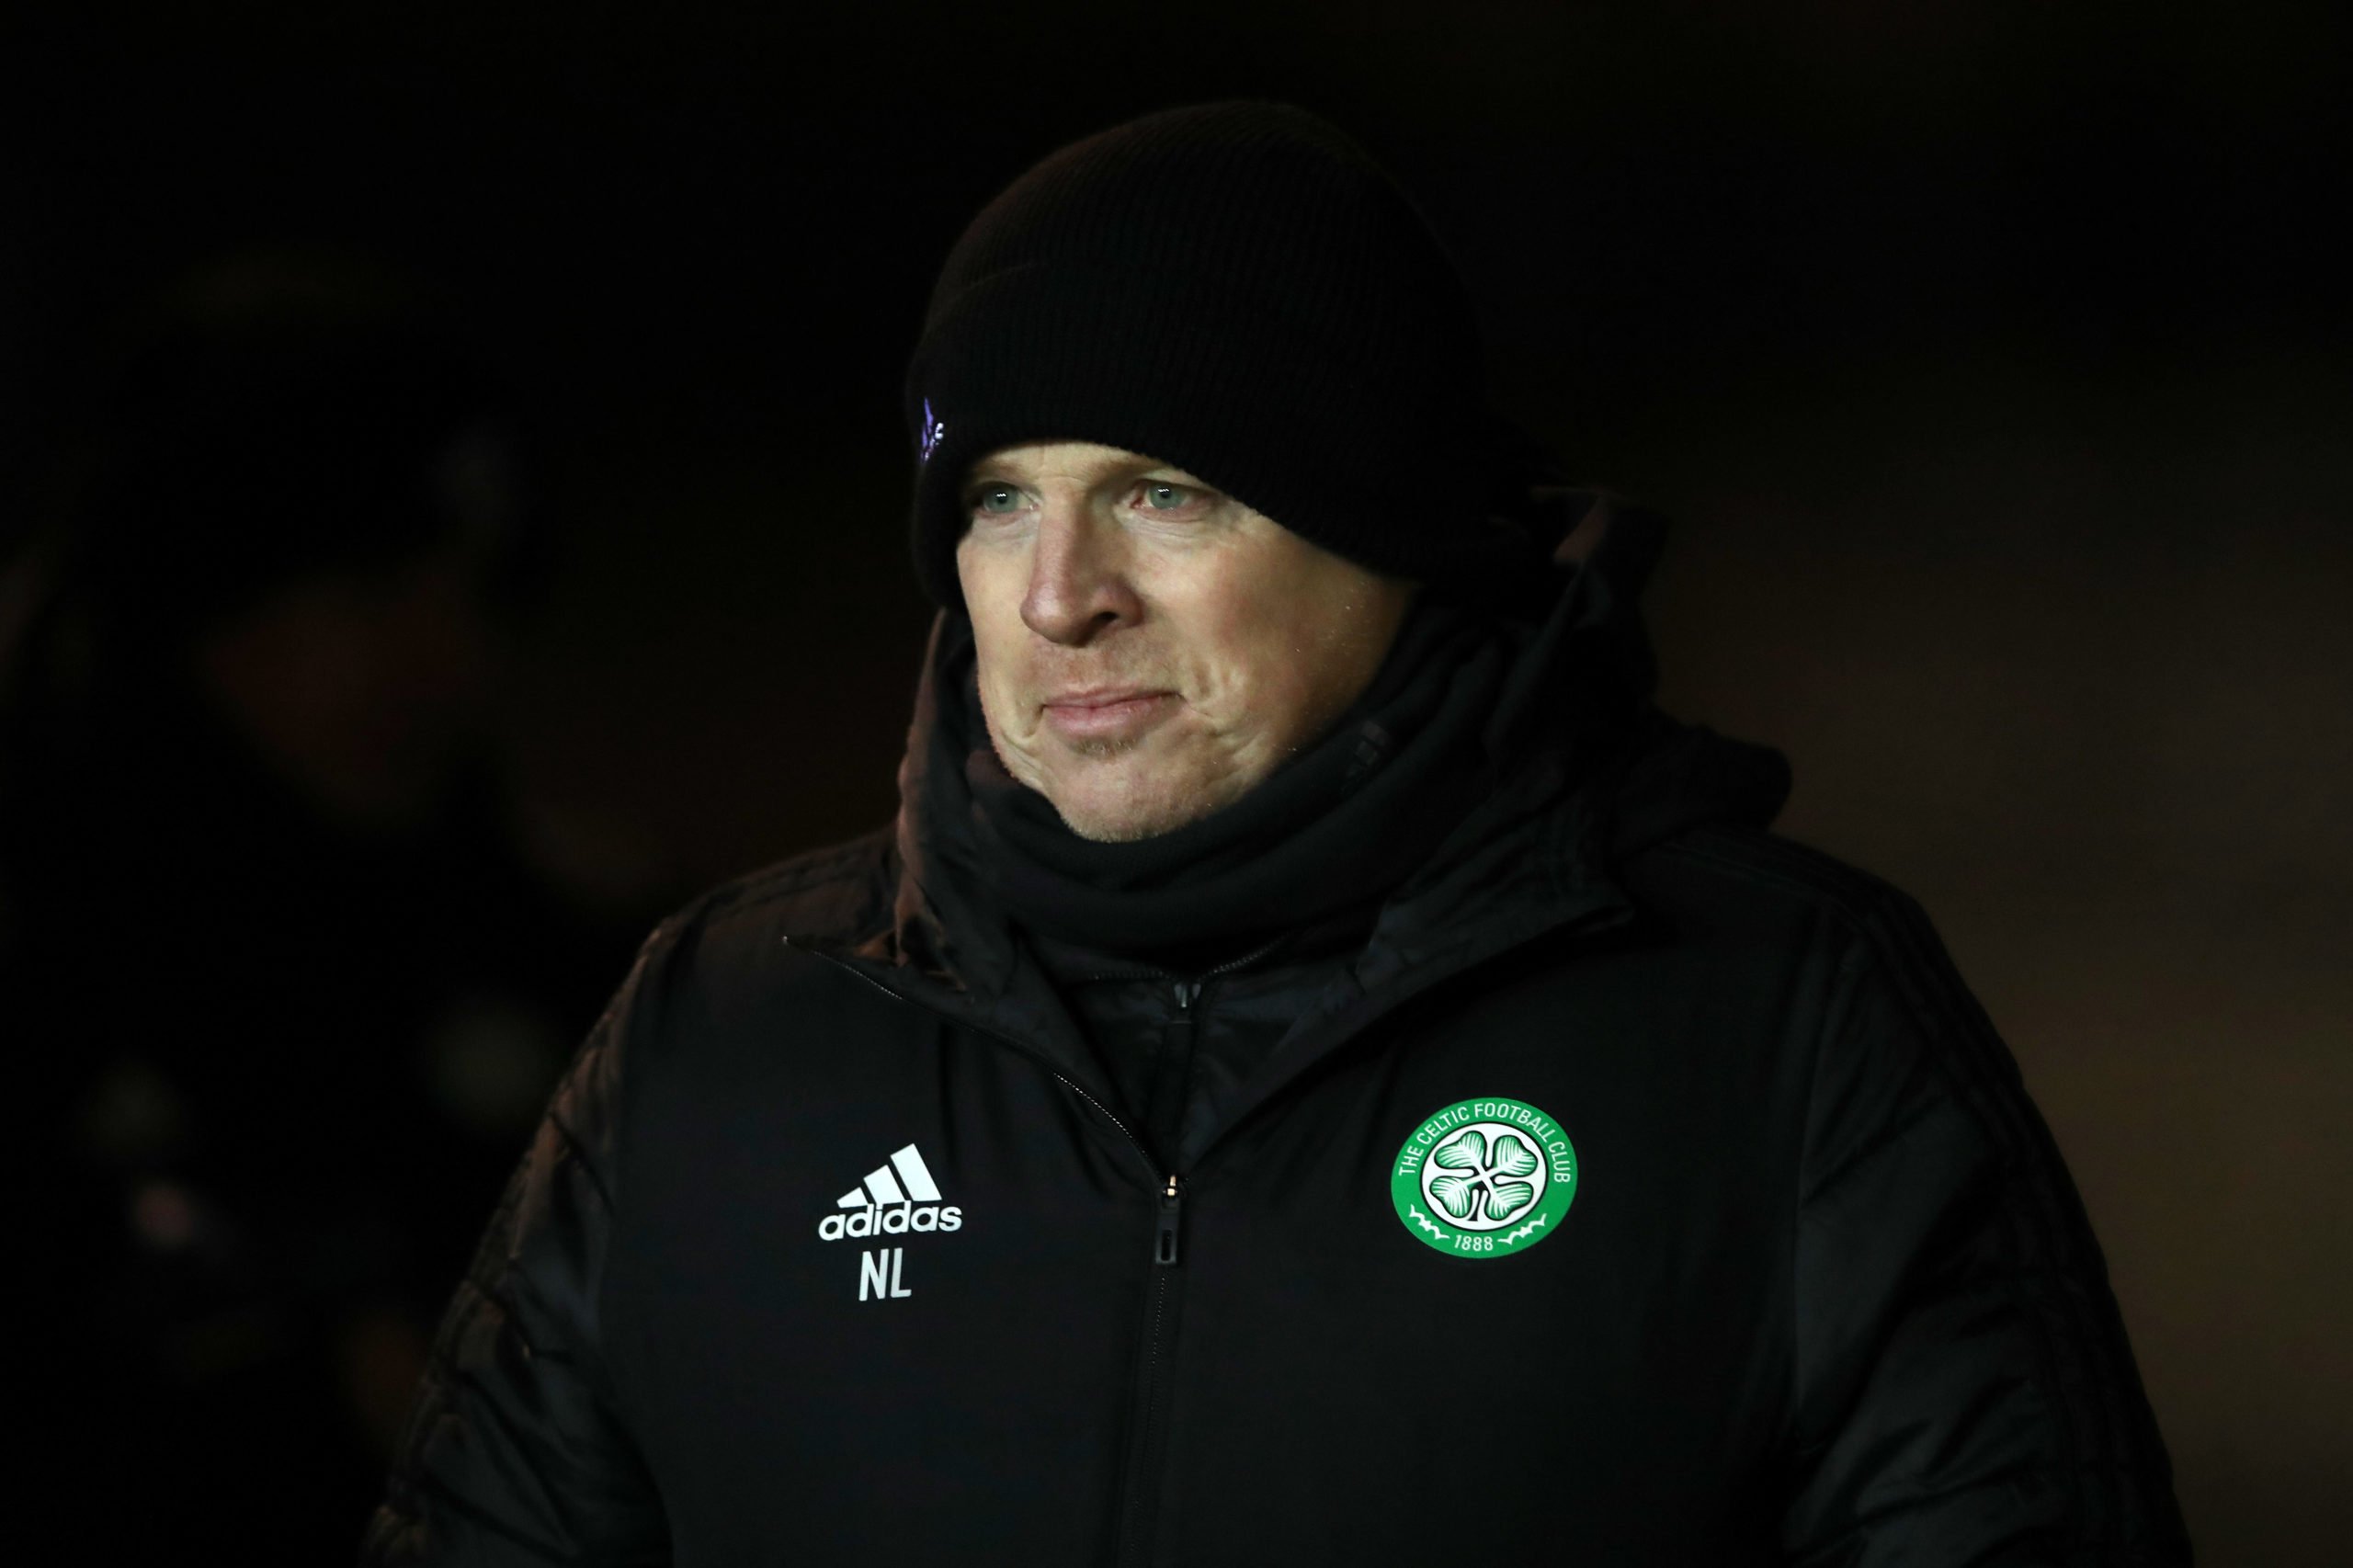 Neil Lennon speaks out against 'new breed' of Celtic supporter in first major interview since resignation